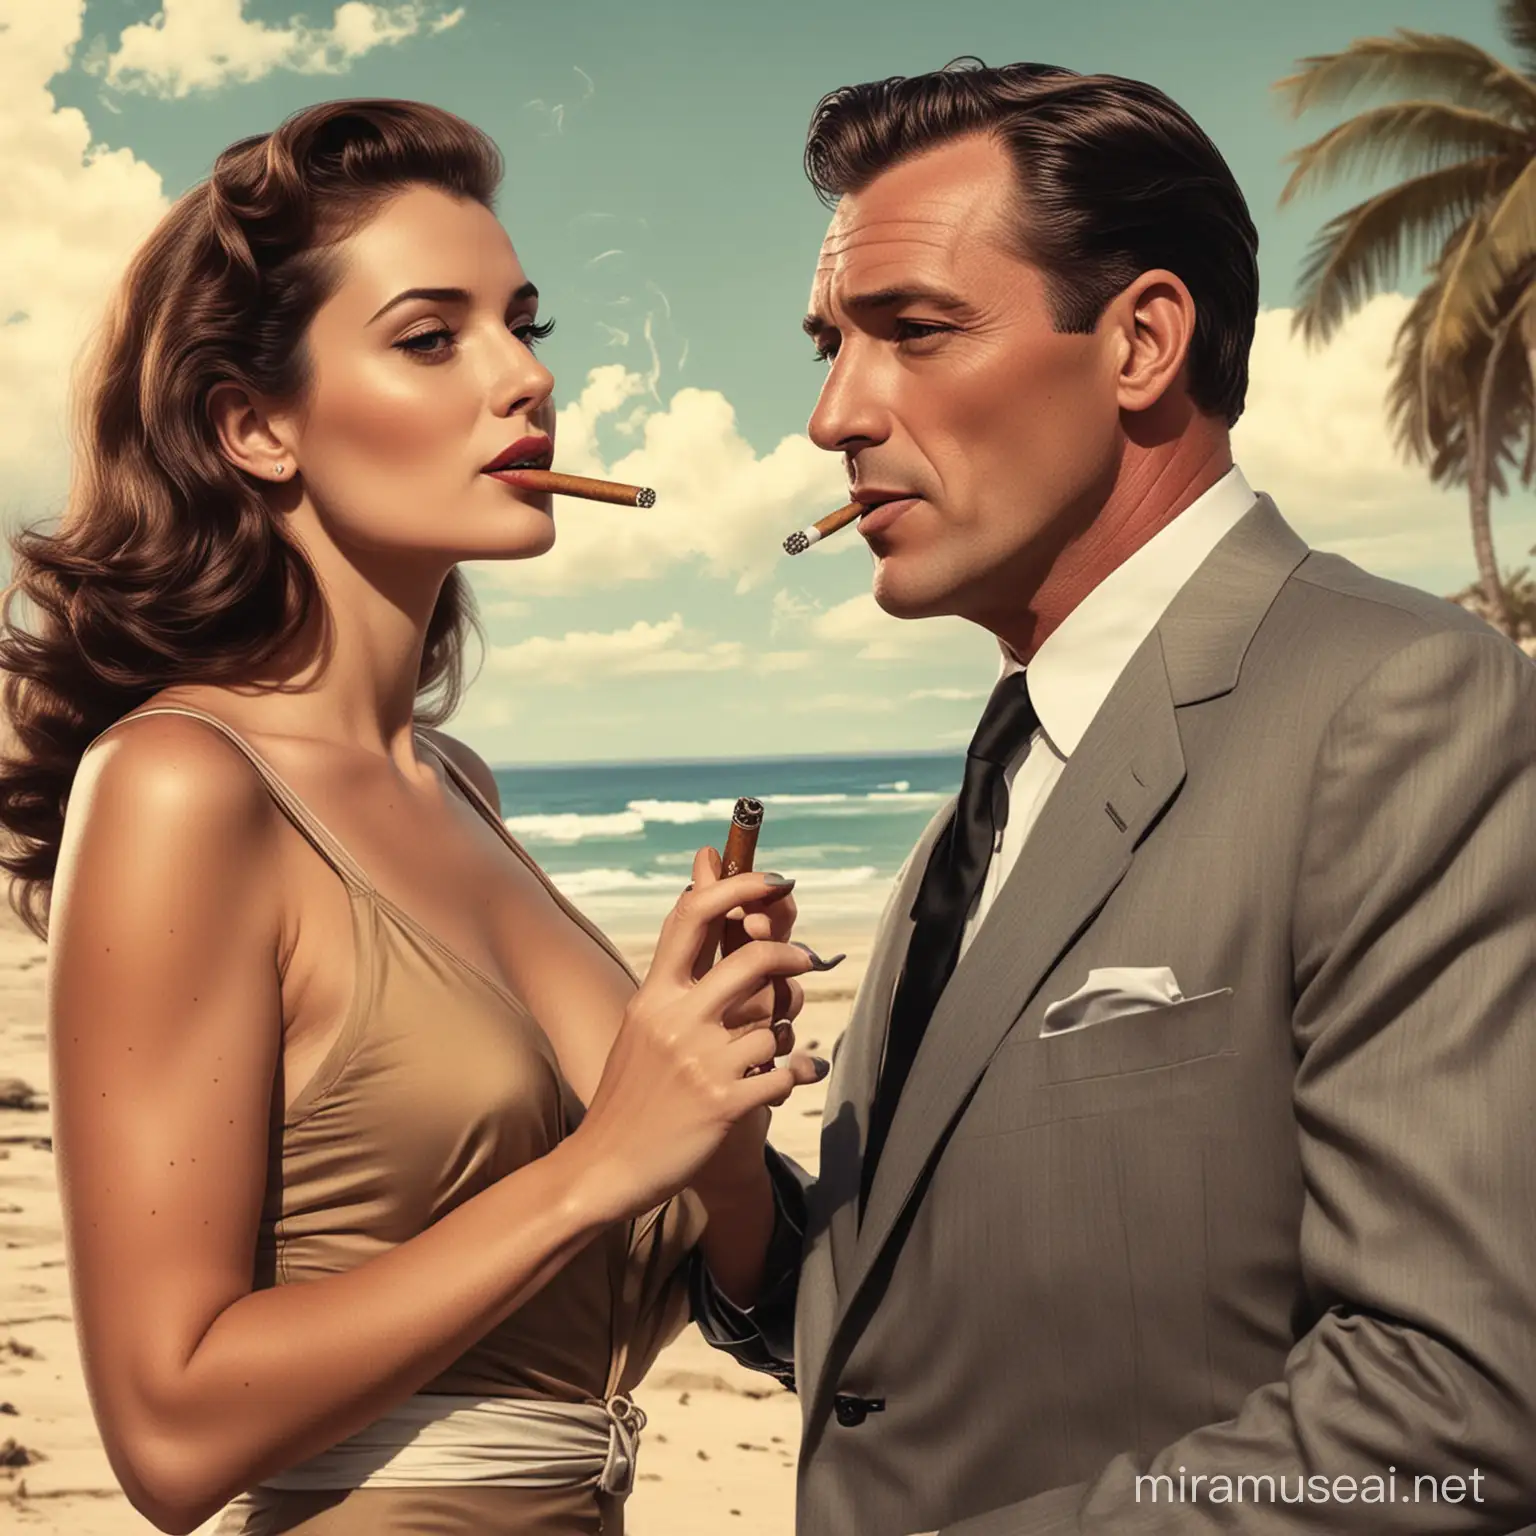  old hollywood comic book style young  cia spy and woman smoking cigar on beach
